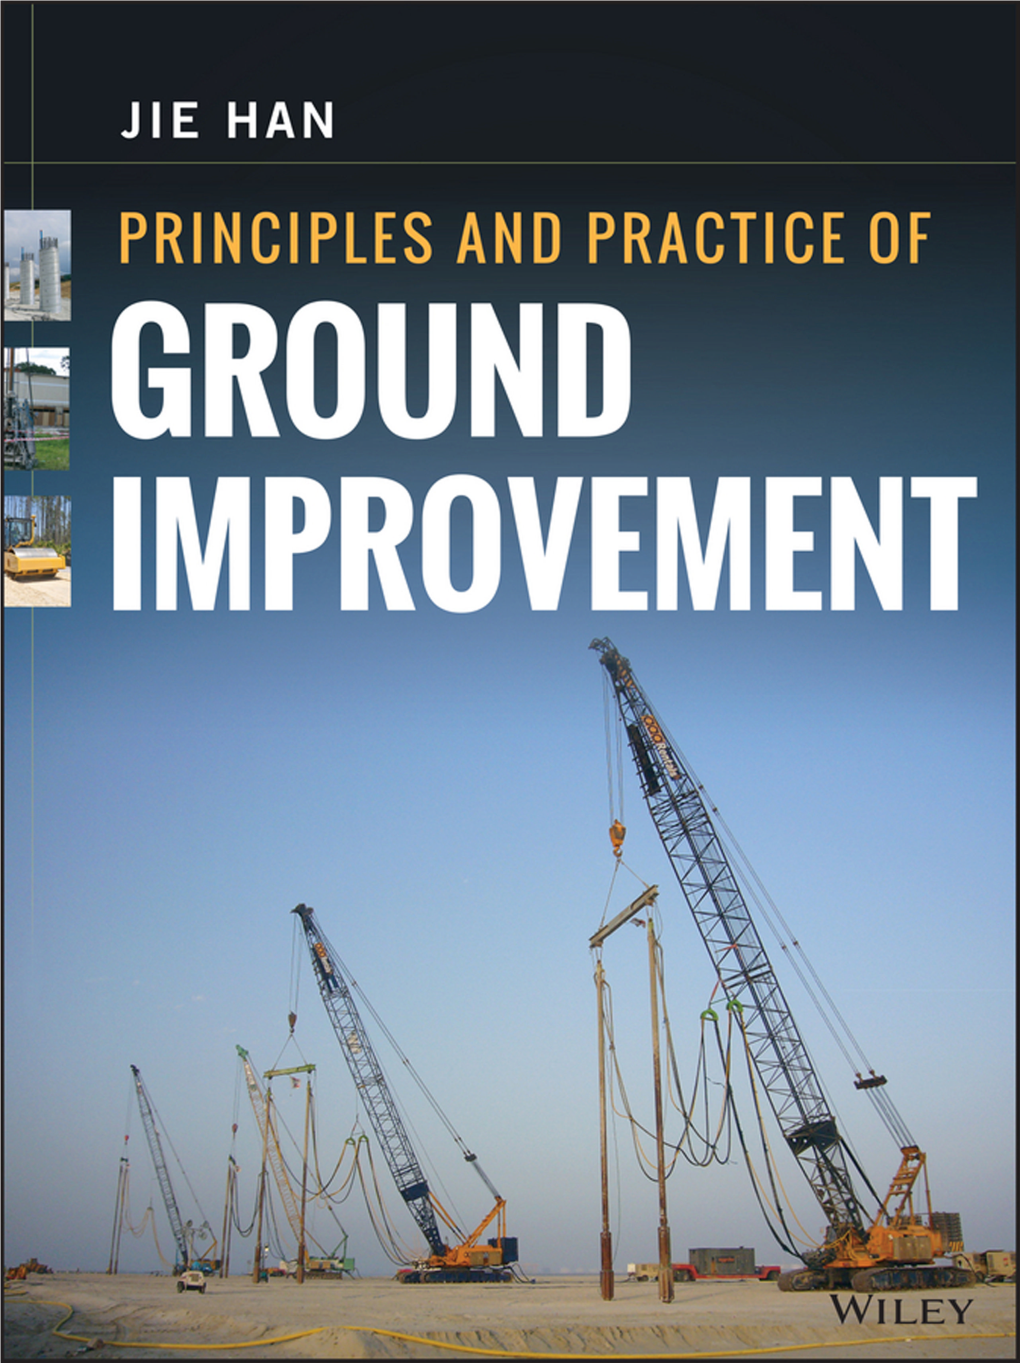 Principles and Practice of Ground Improvement / Jie Han